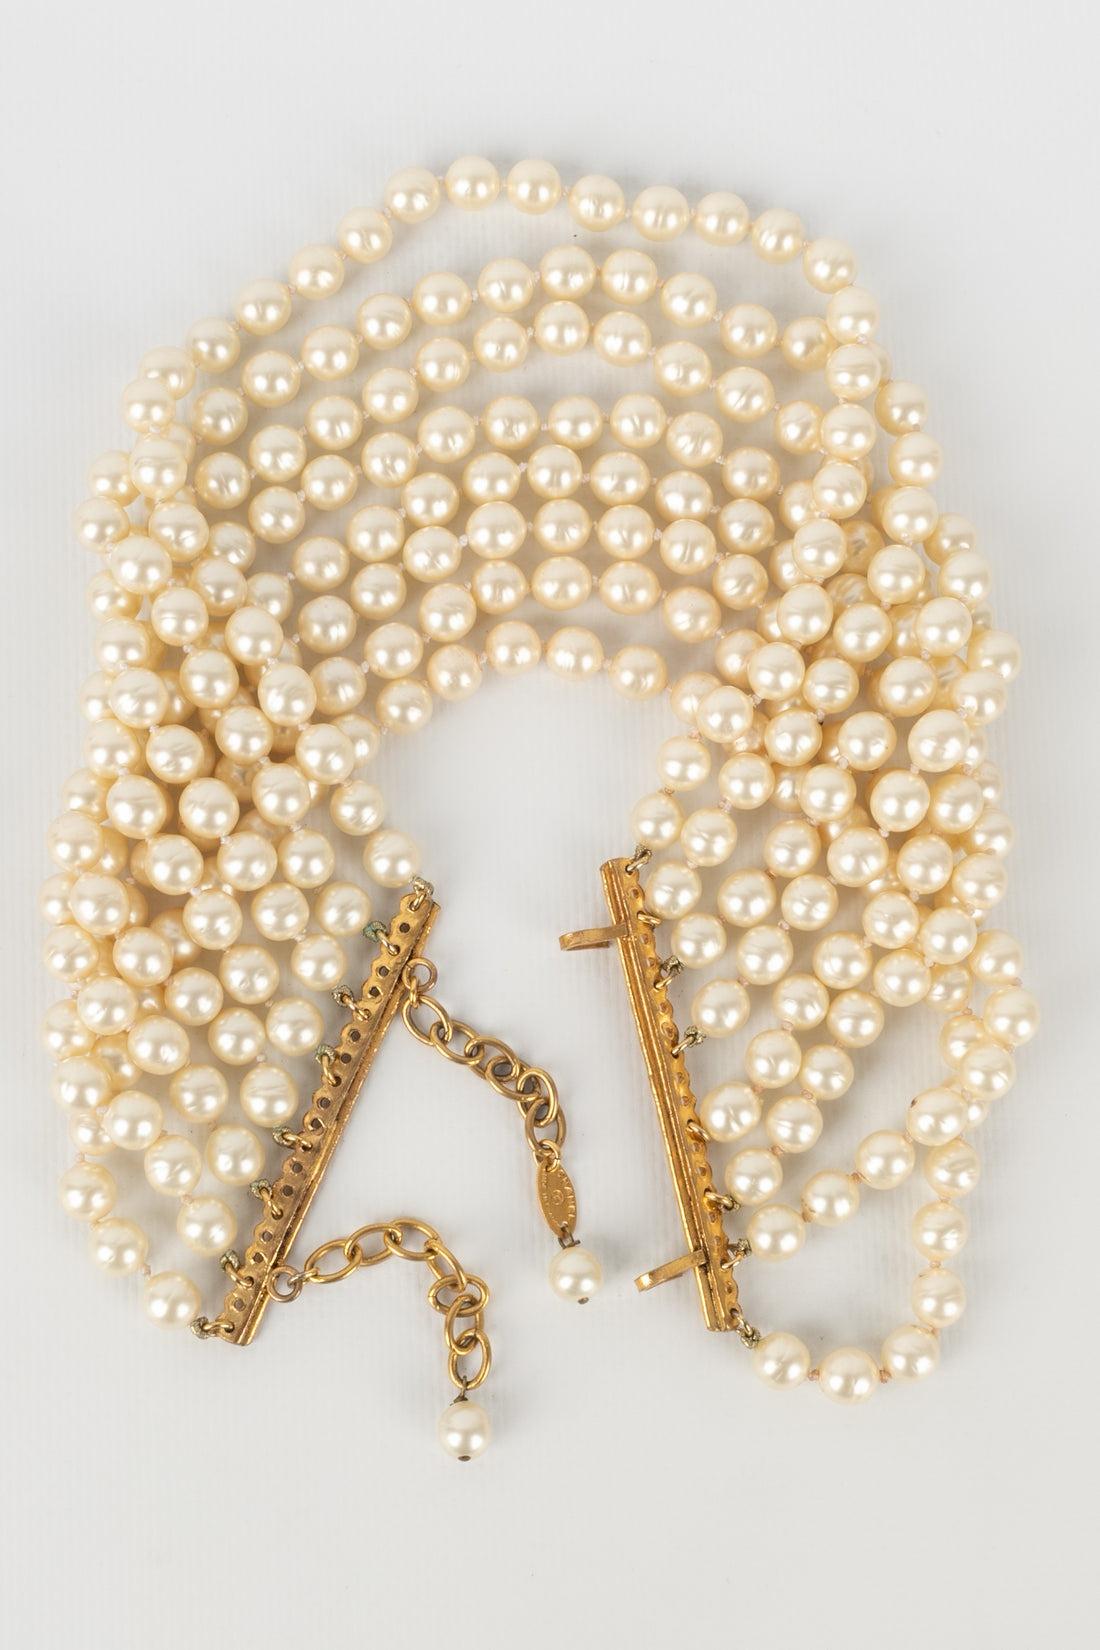 Chanel Golden Metal Choker Necklace with Costumer Pearls, 1980s 1